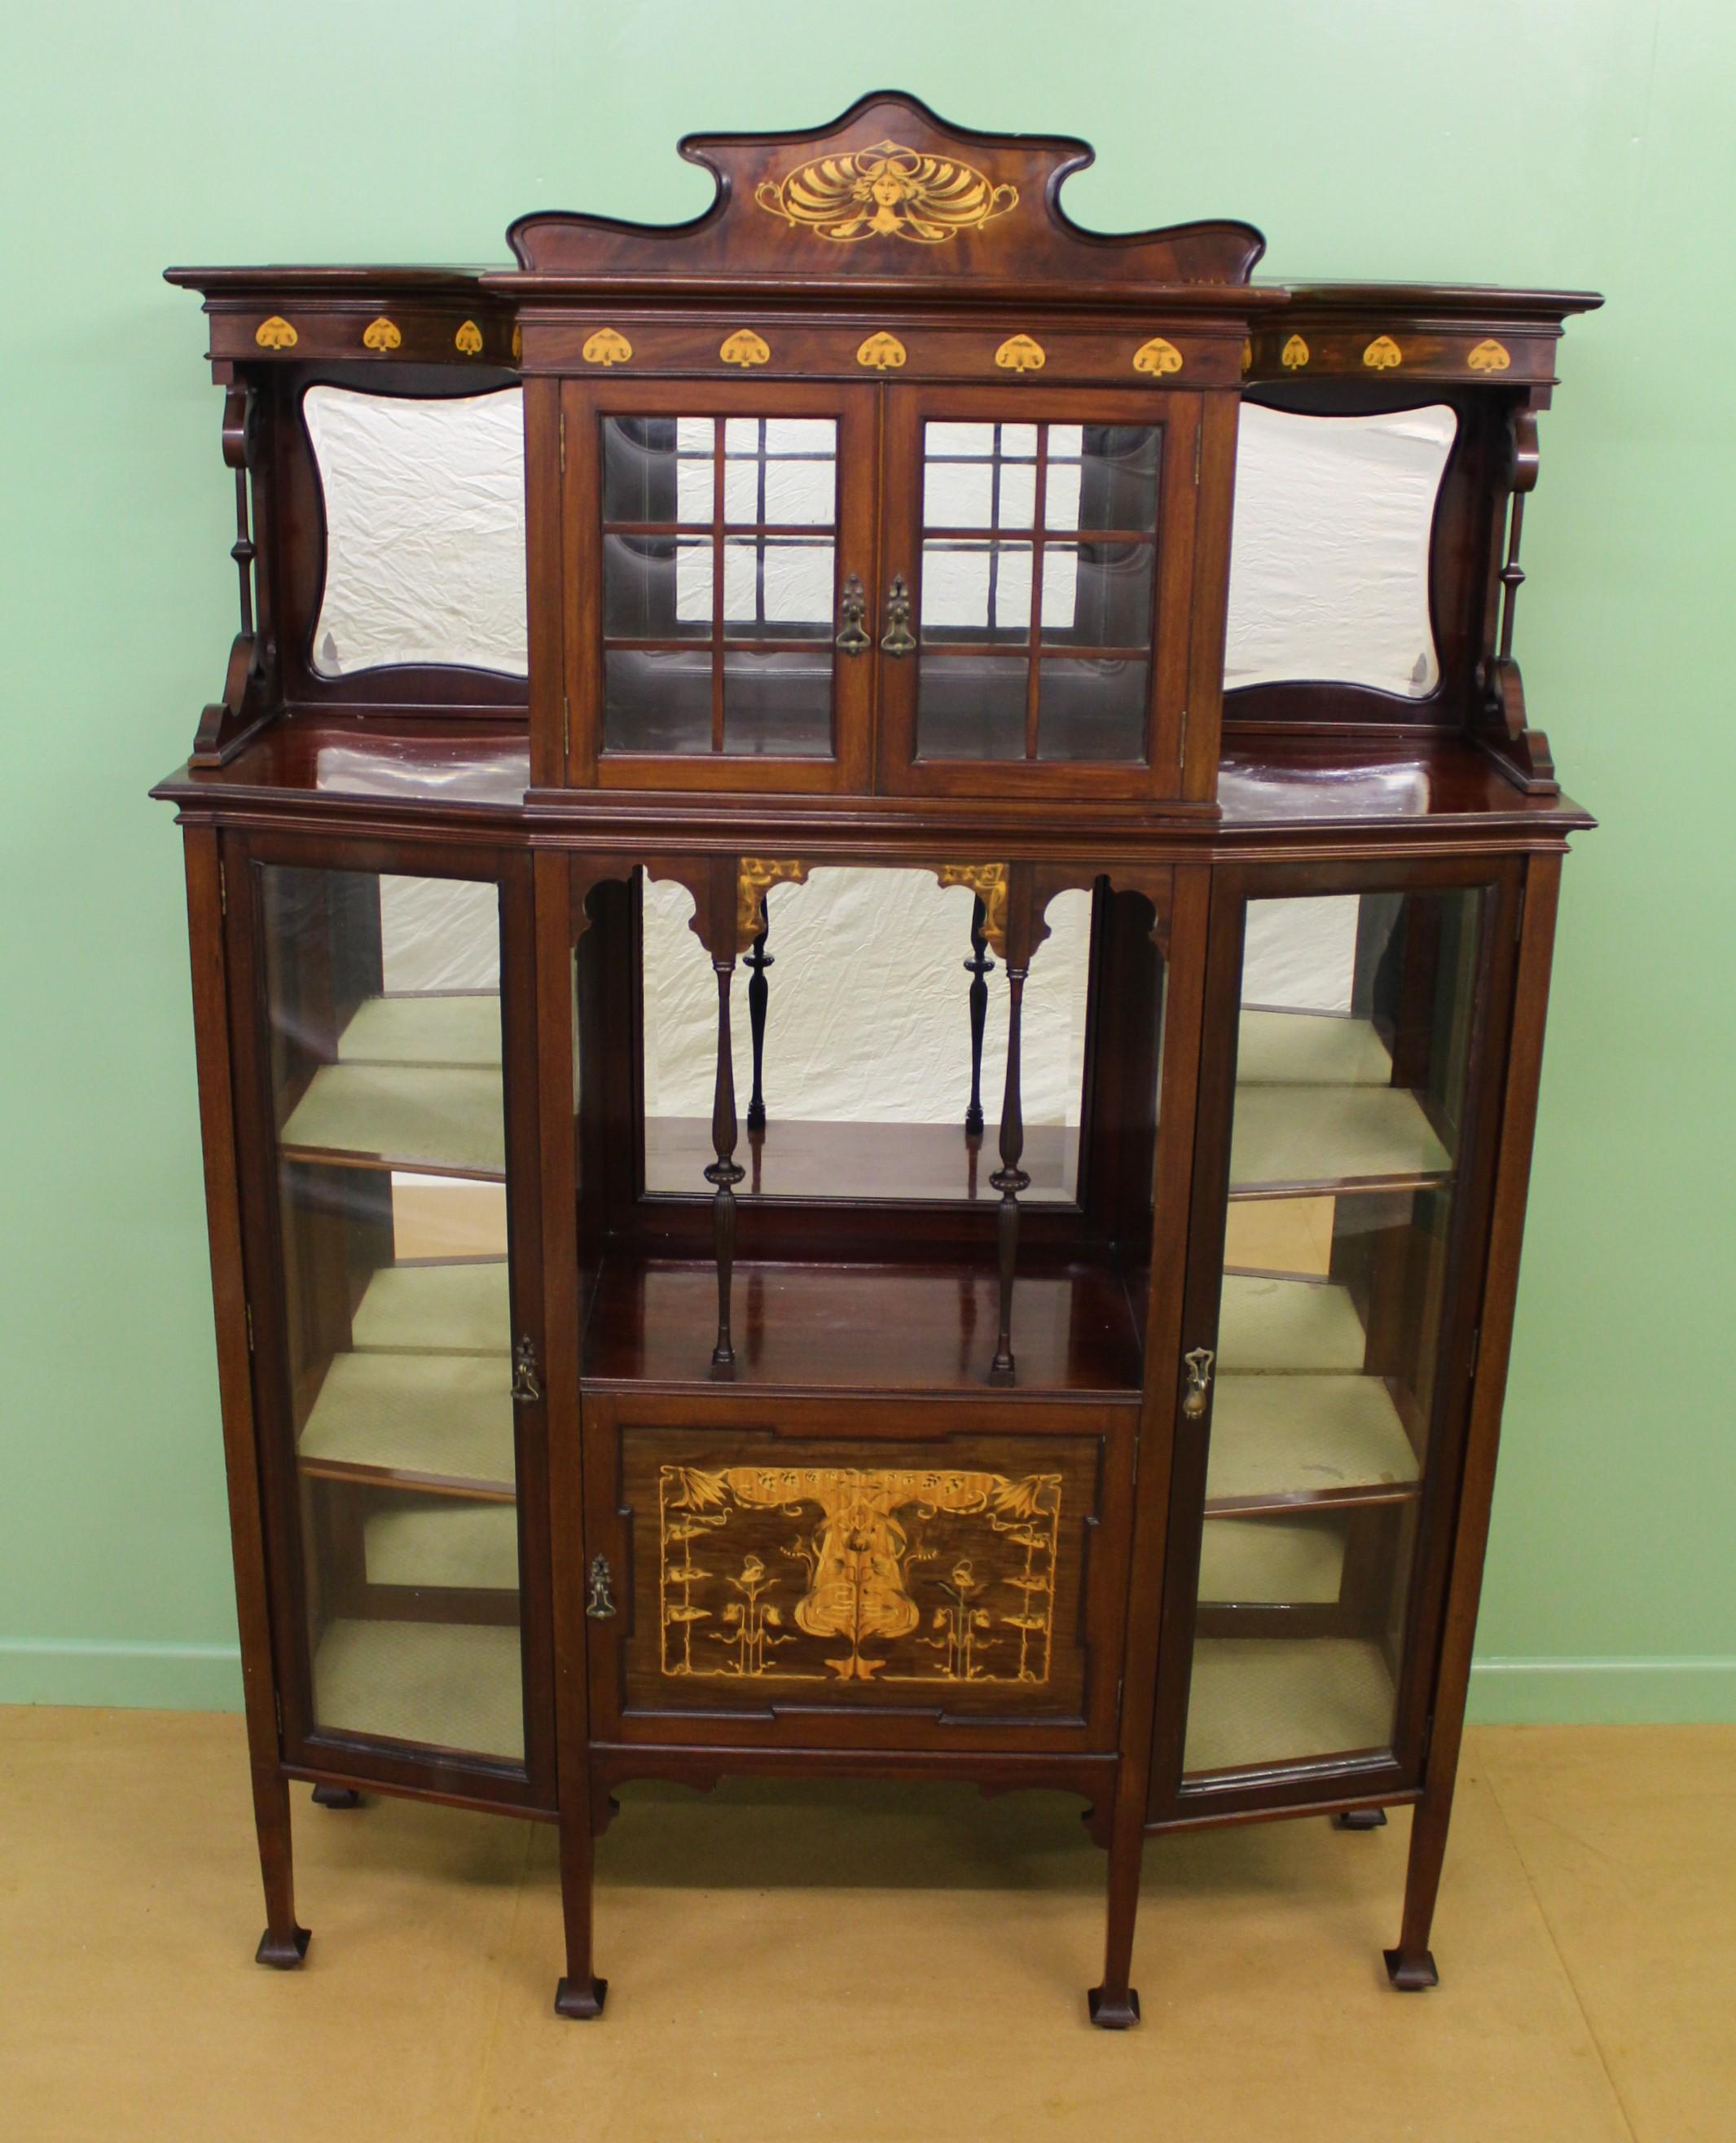 A wonderful display cabinet from the Art Nouveau period. Of very good construction in mahogany and embellished with stylized inlaid motifs in satinwood and boxwood. The top section with a central glazed cabinet fitted with the original panes of